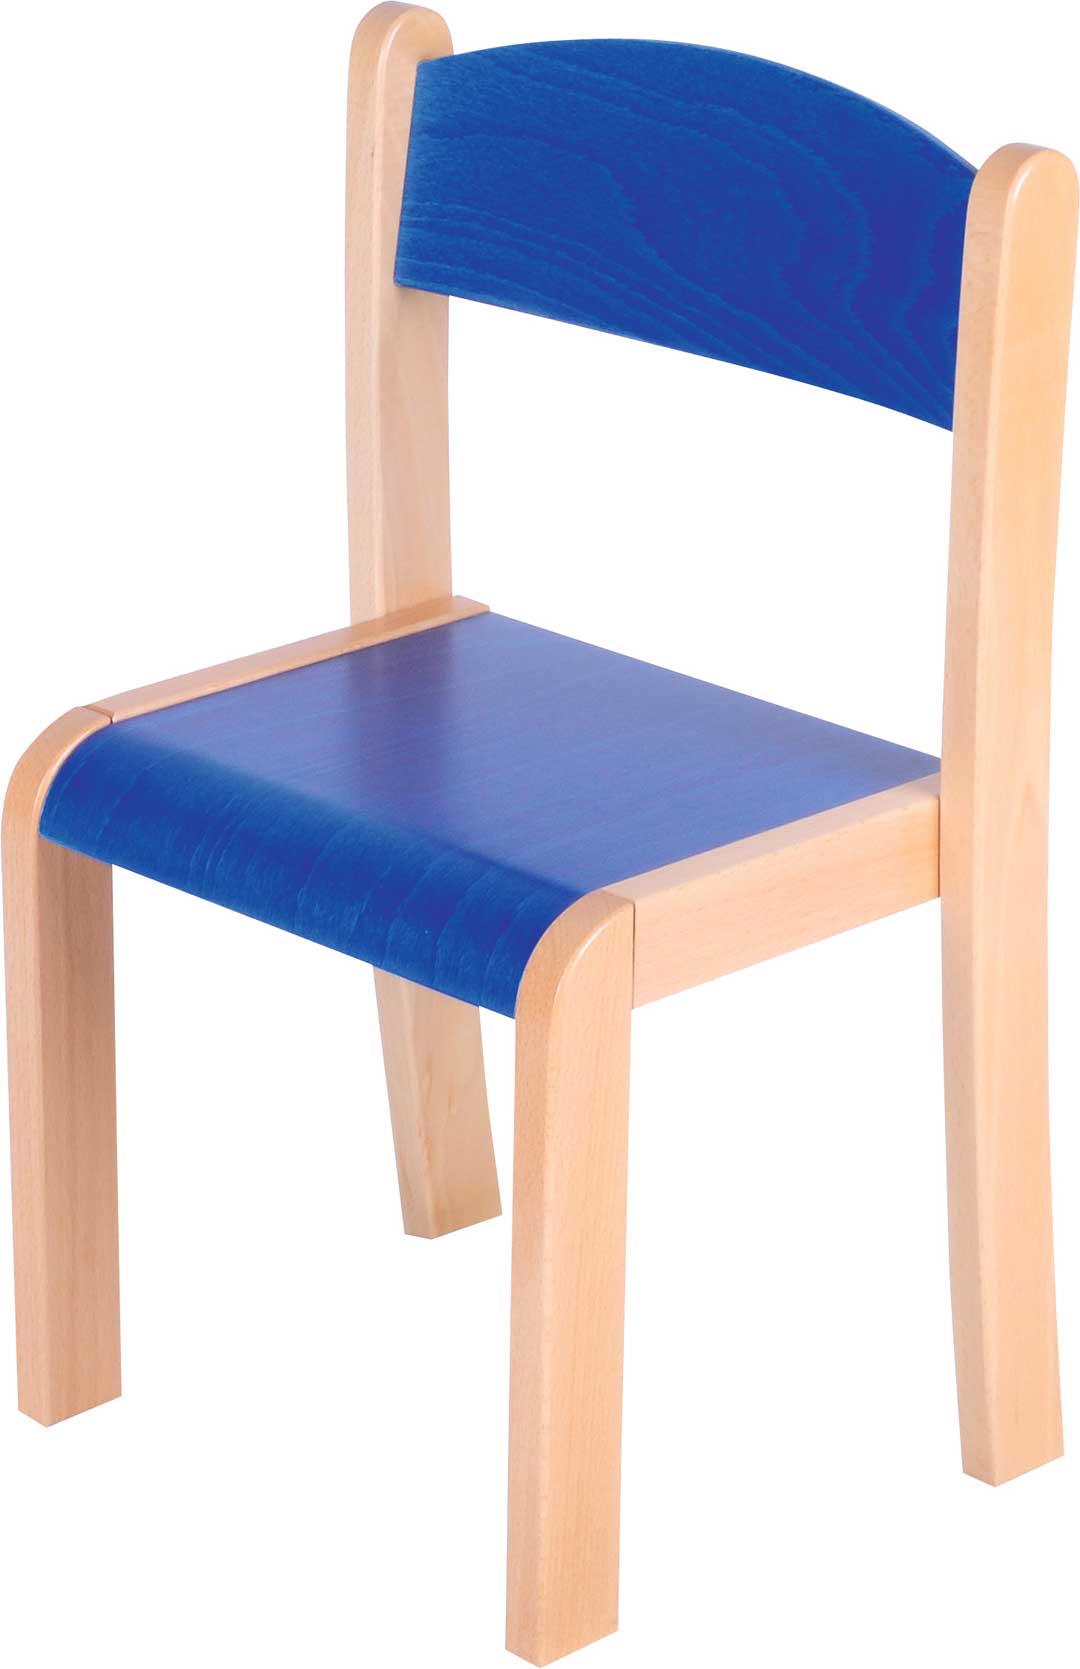 Philip Wooden Chair 31cm All Colours